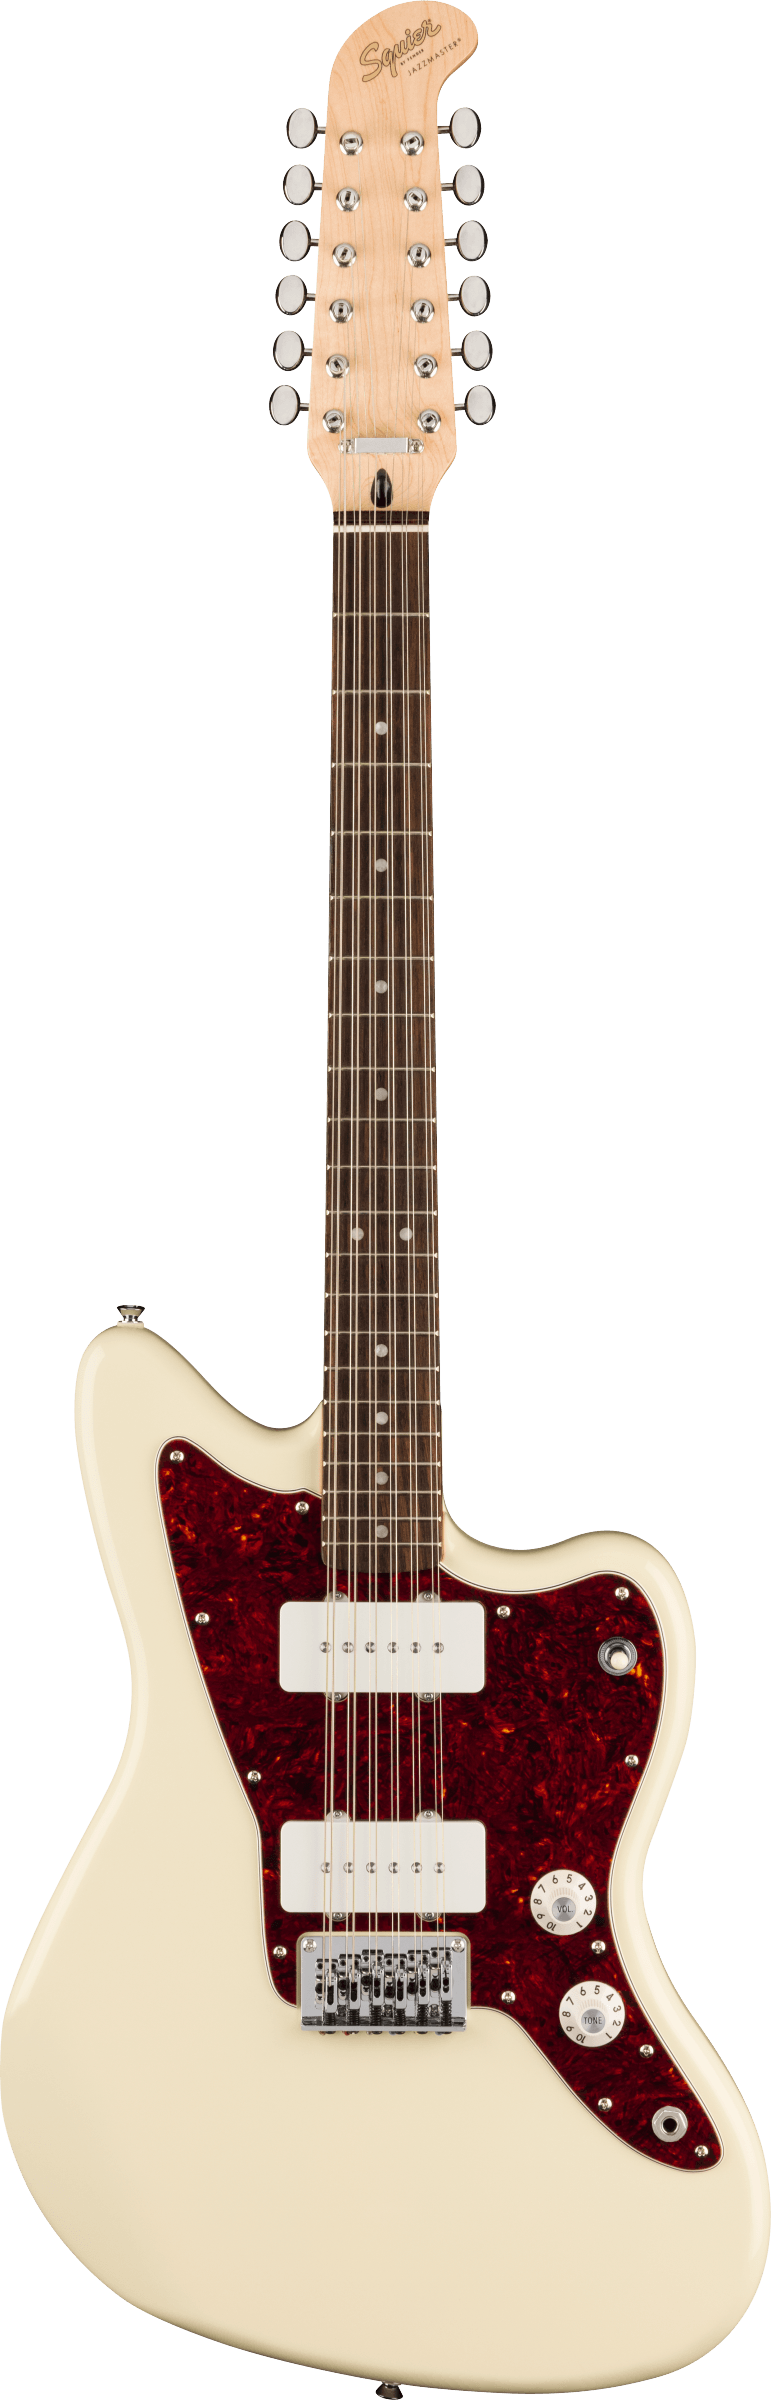 Squier Paranormal Jazzmaster XII 12-String Electric Guitar in Olympic White  - Andertons Music Co.